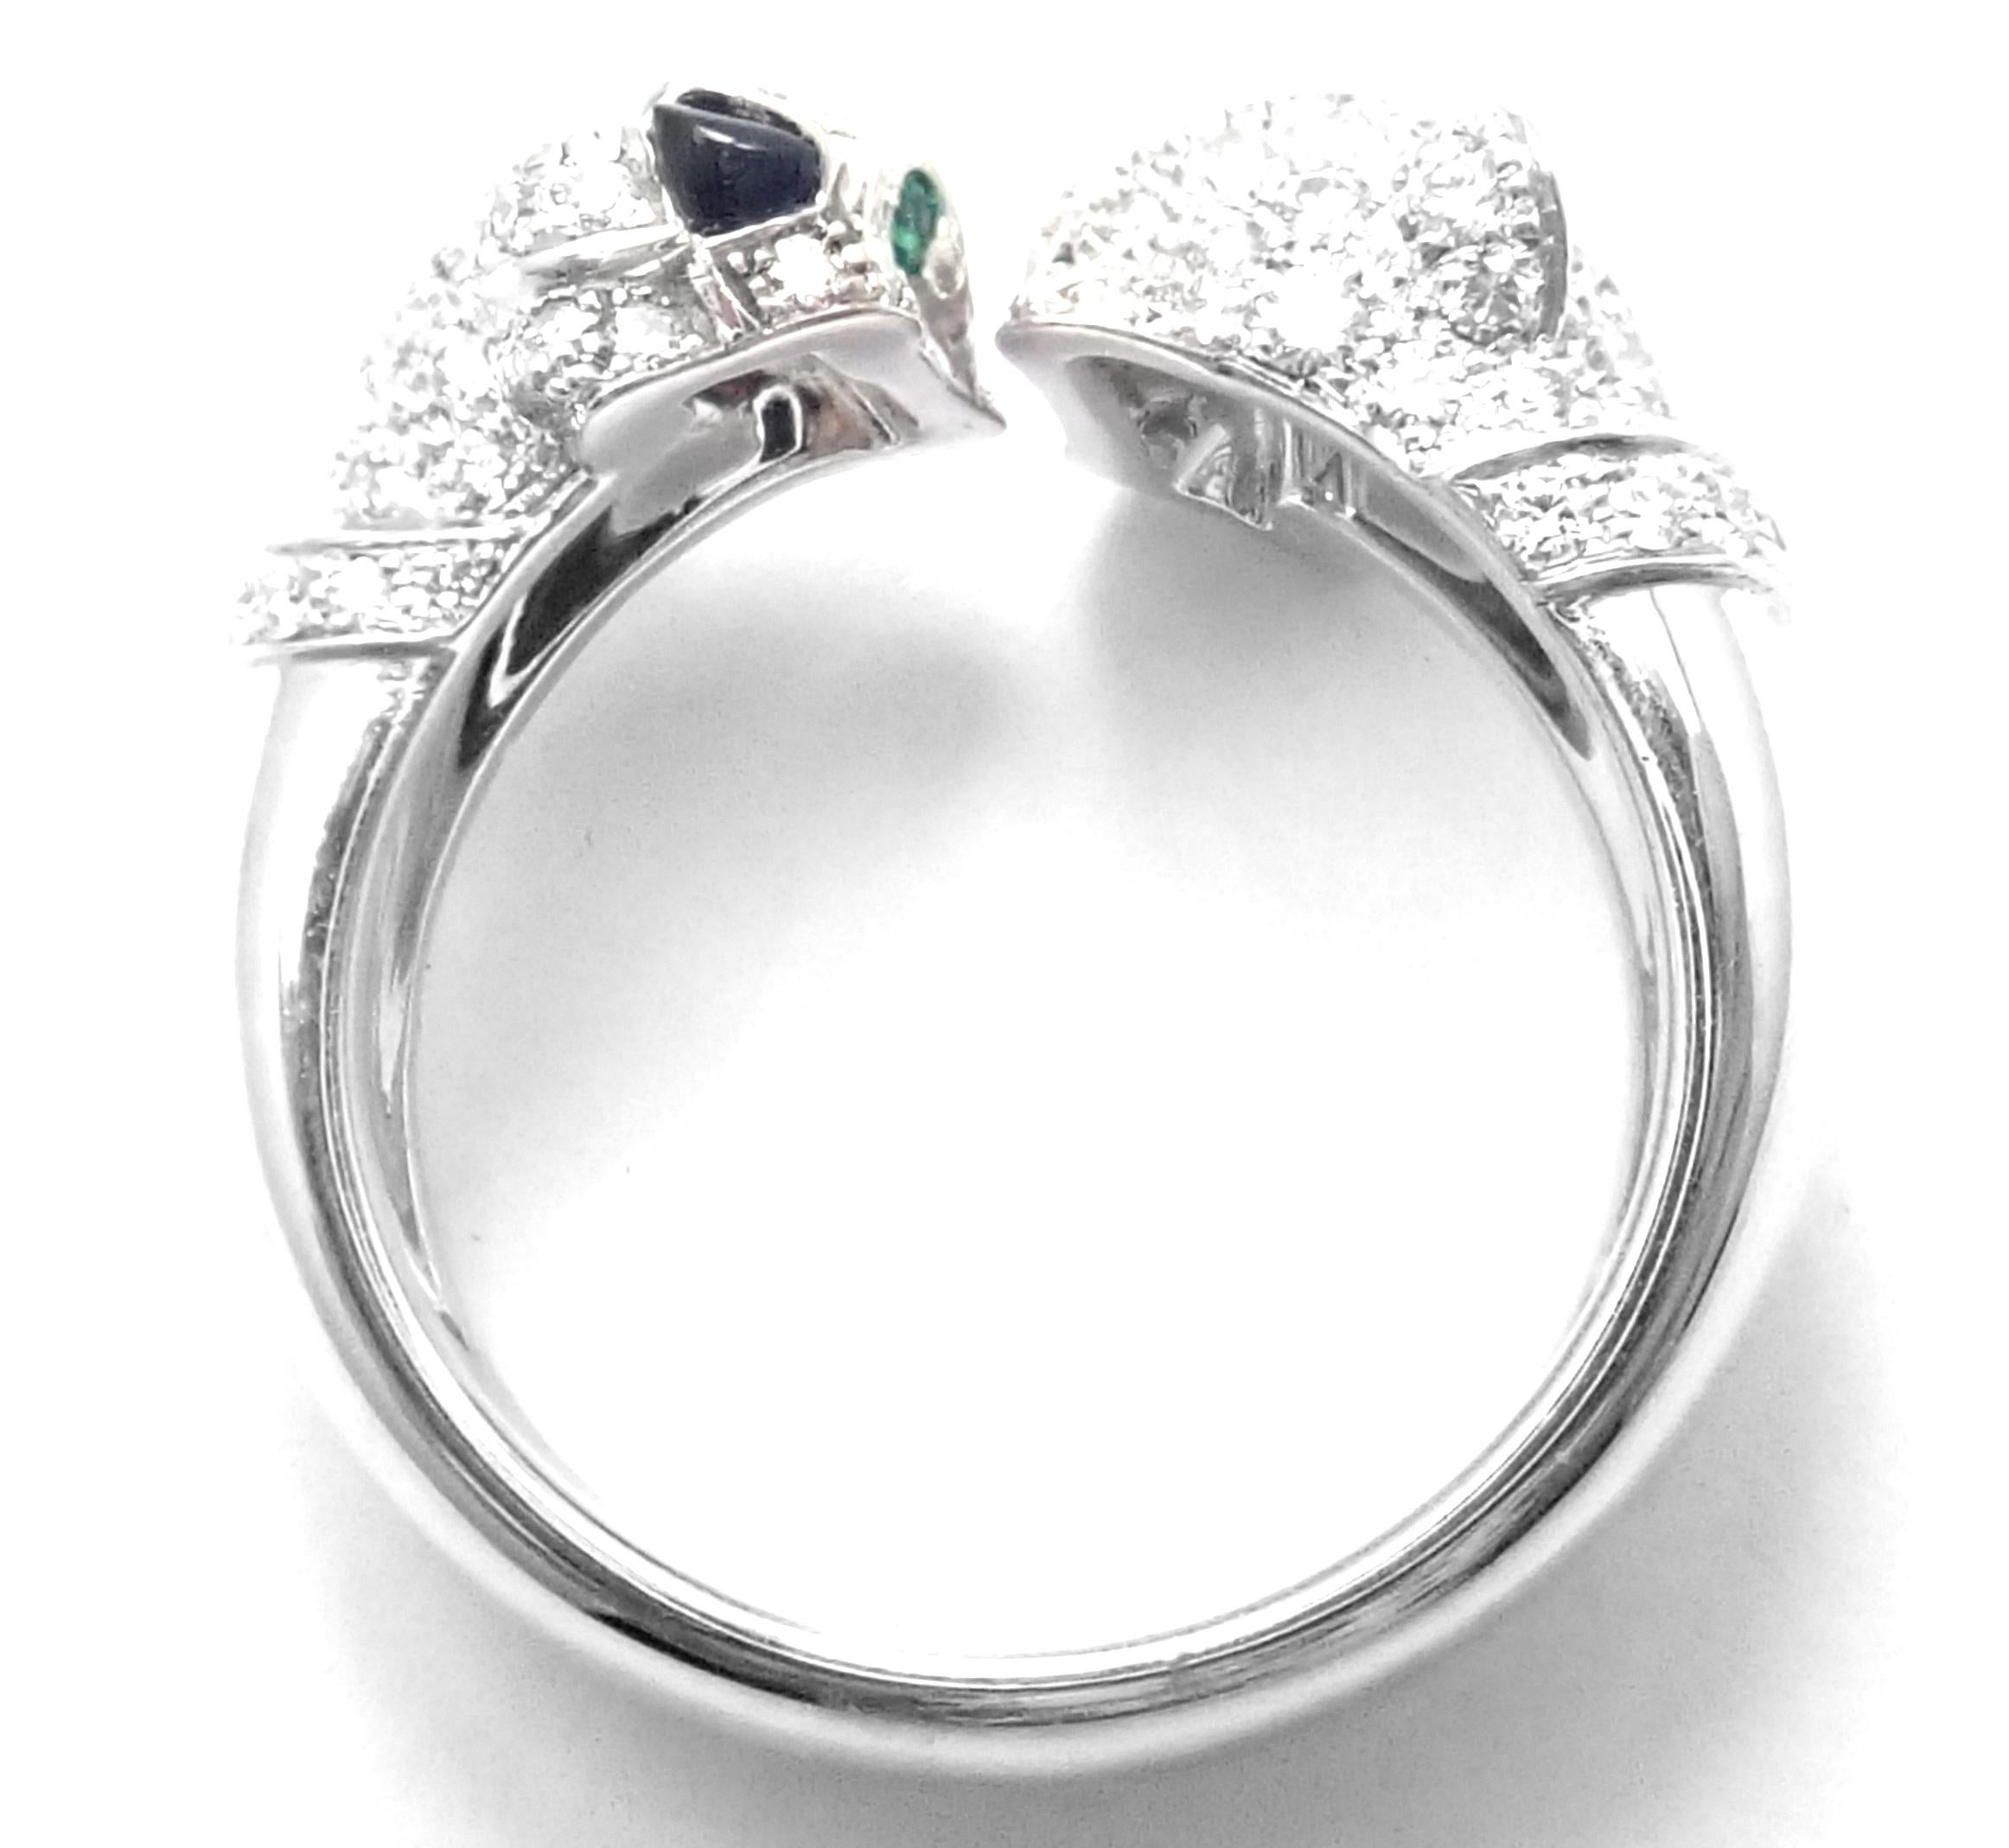 Brilliant Cut Cartier Double Panther Panthere Diamond Emerald Onyx White Gold Ring